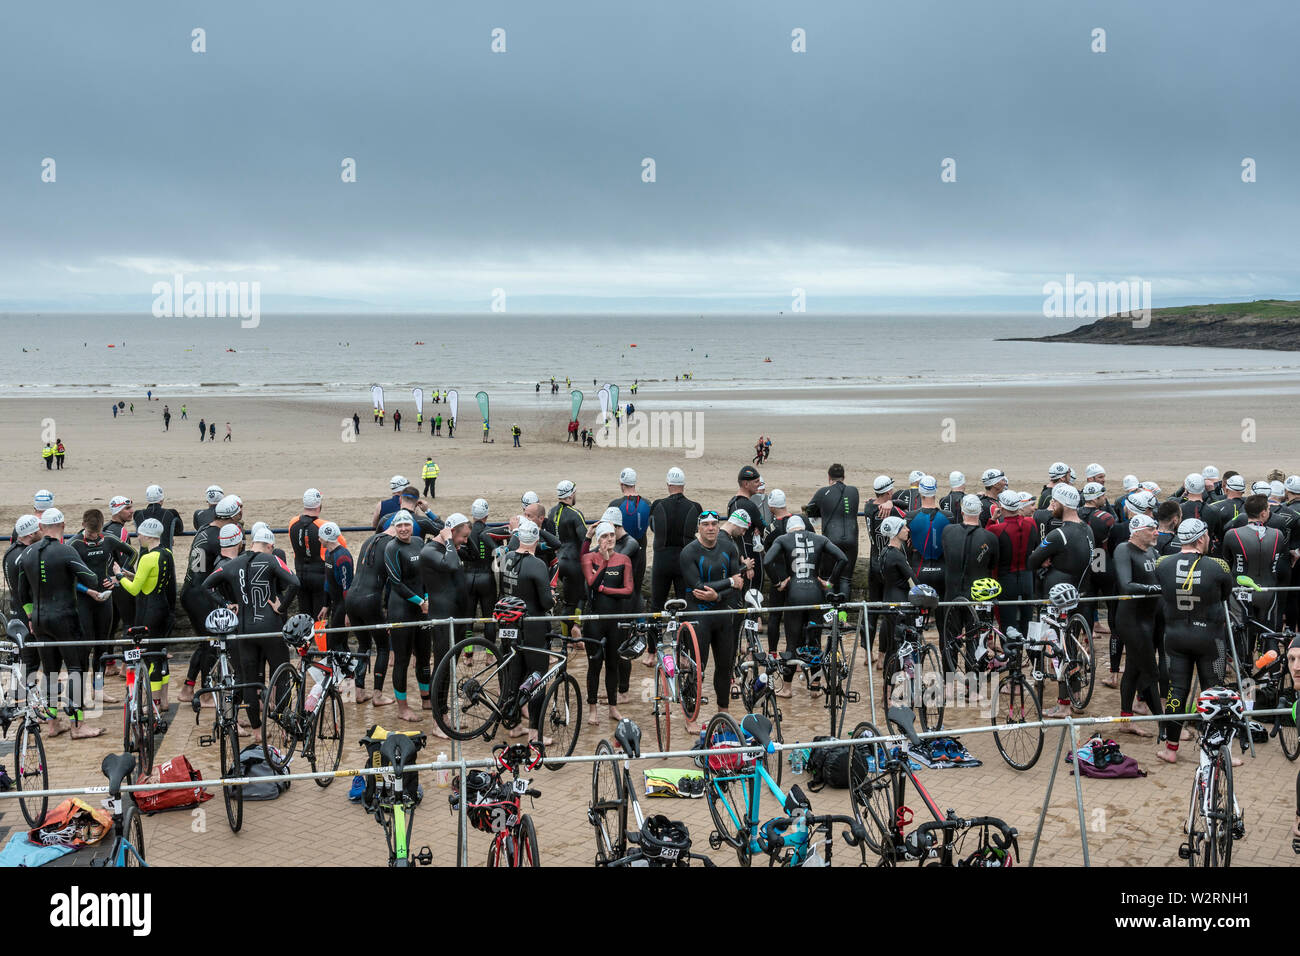 Beneath dark clouds competitors in the 2019 Barry Island sprint triathlon wait on the promenade beside the beach to start their race. Stock Photo